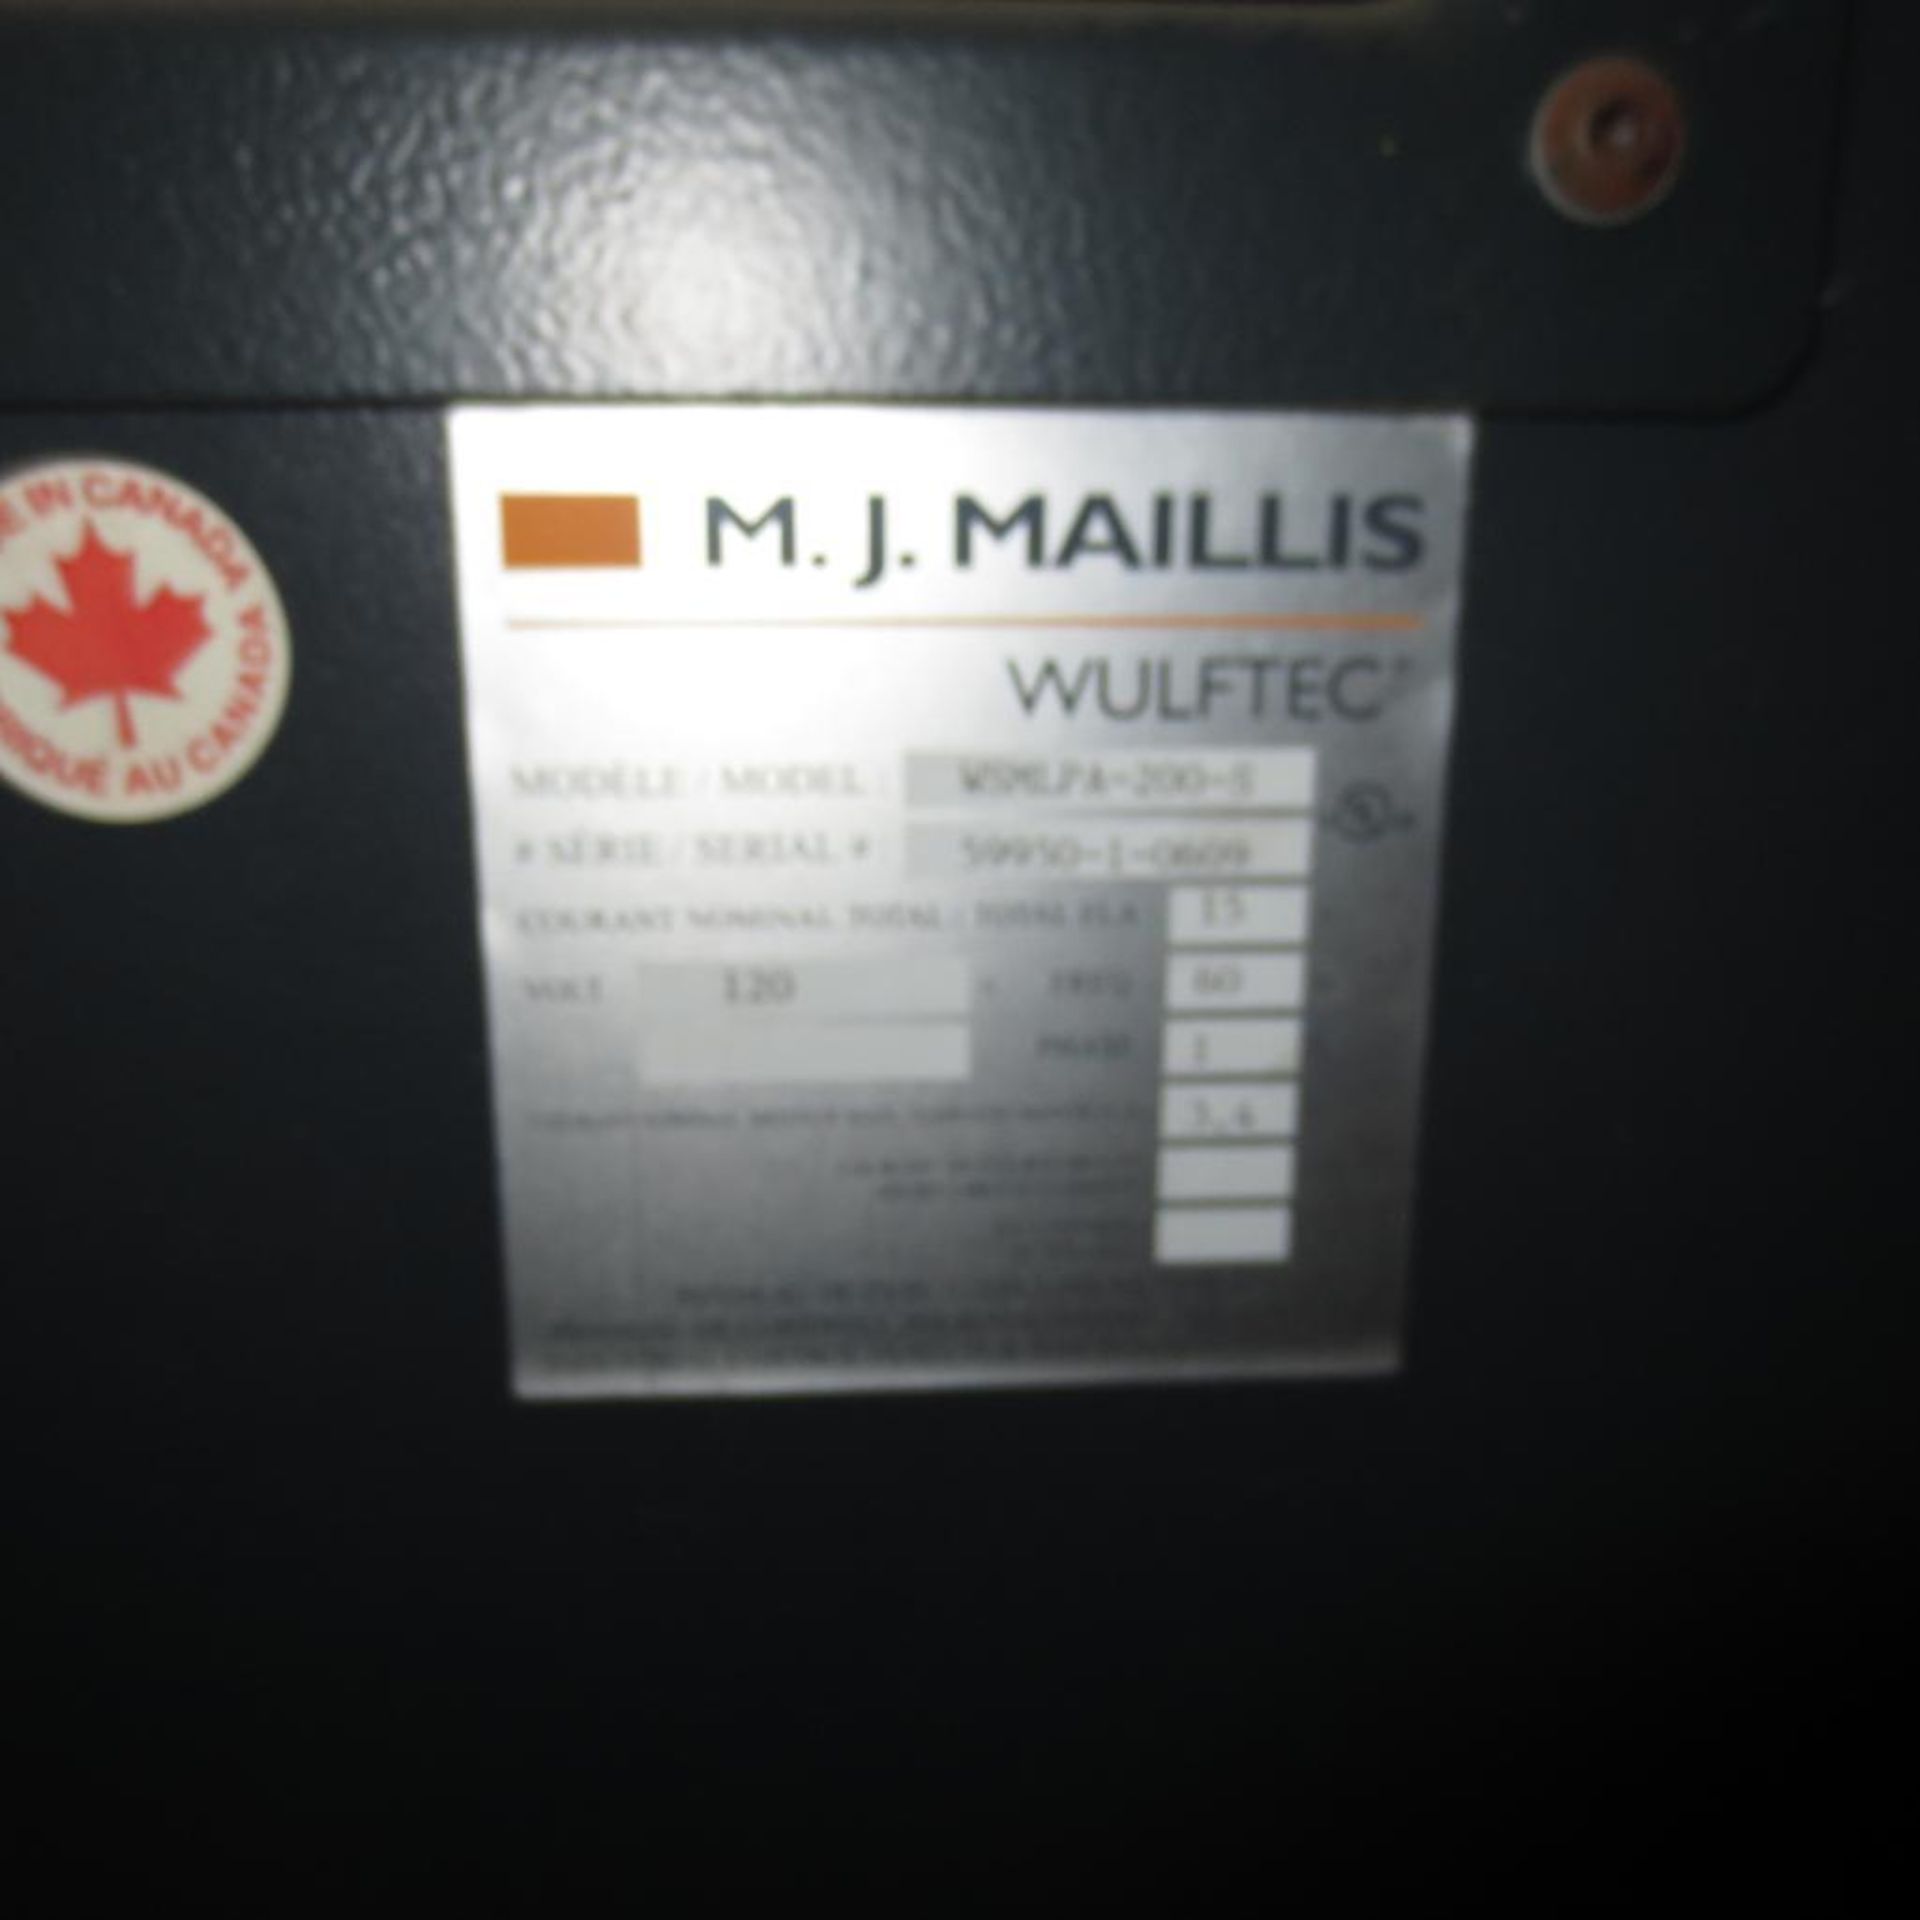 MJ Maillis Wulftec Pallet Wrapper, Model WSMLPA-200-S, 120V, 1 PH, 65" Round Base, S/N 59950-1-0609 - Image 5 of 7